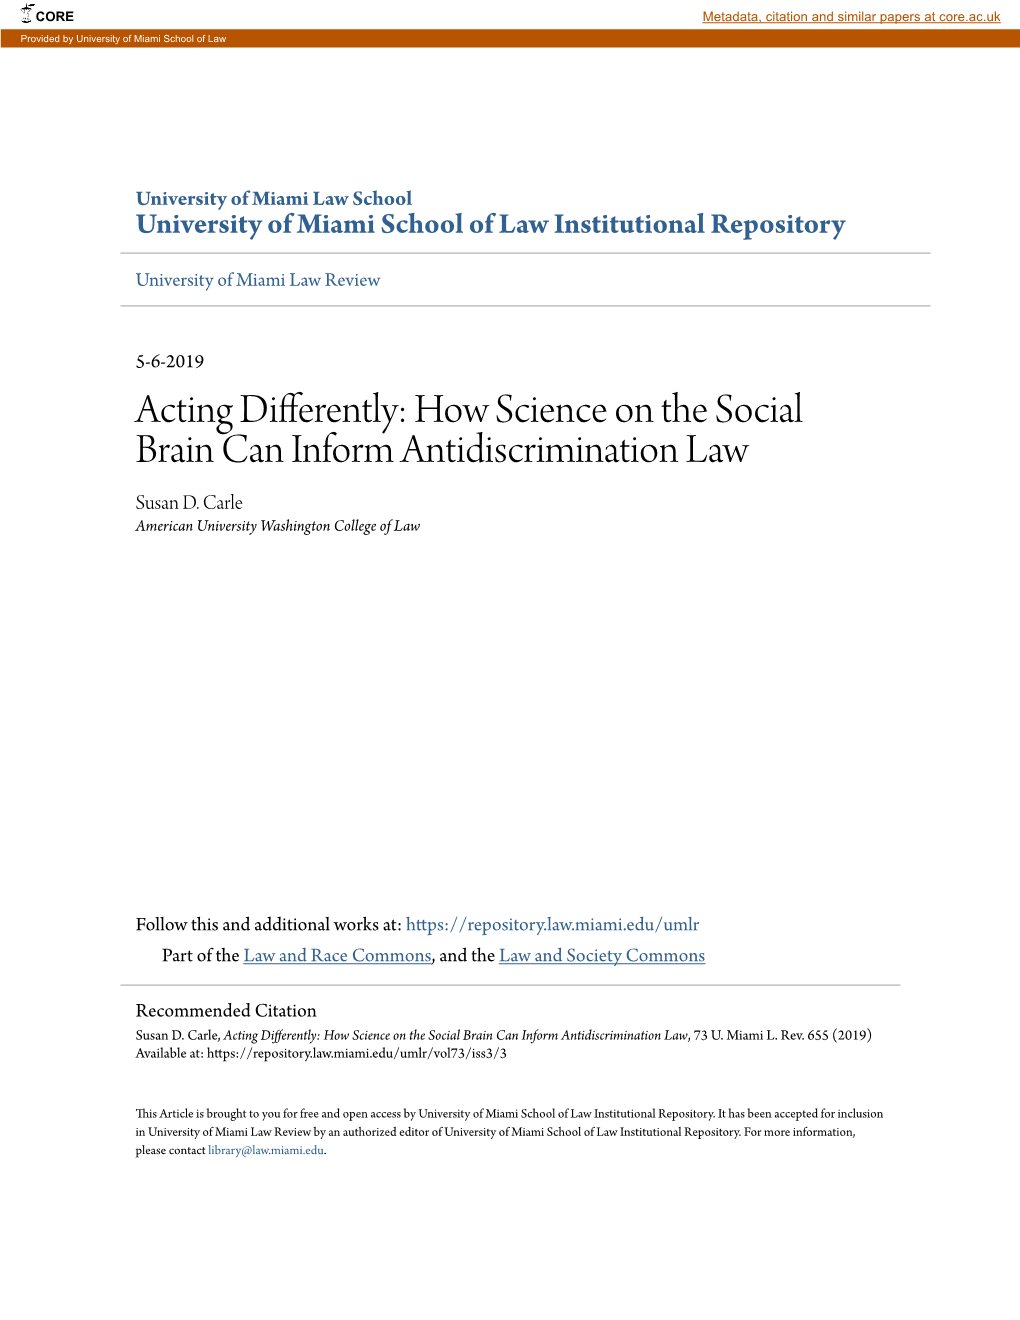 How Science on the Social Brain Can Inform Antidiscrimination Law Susan D